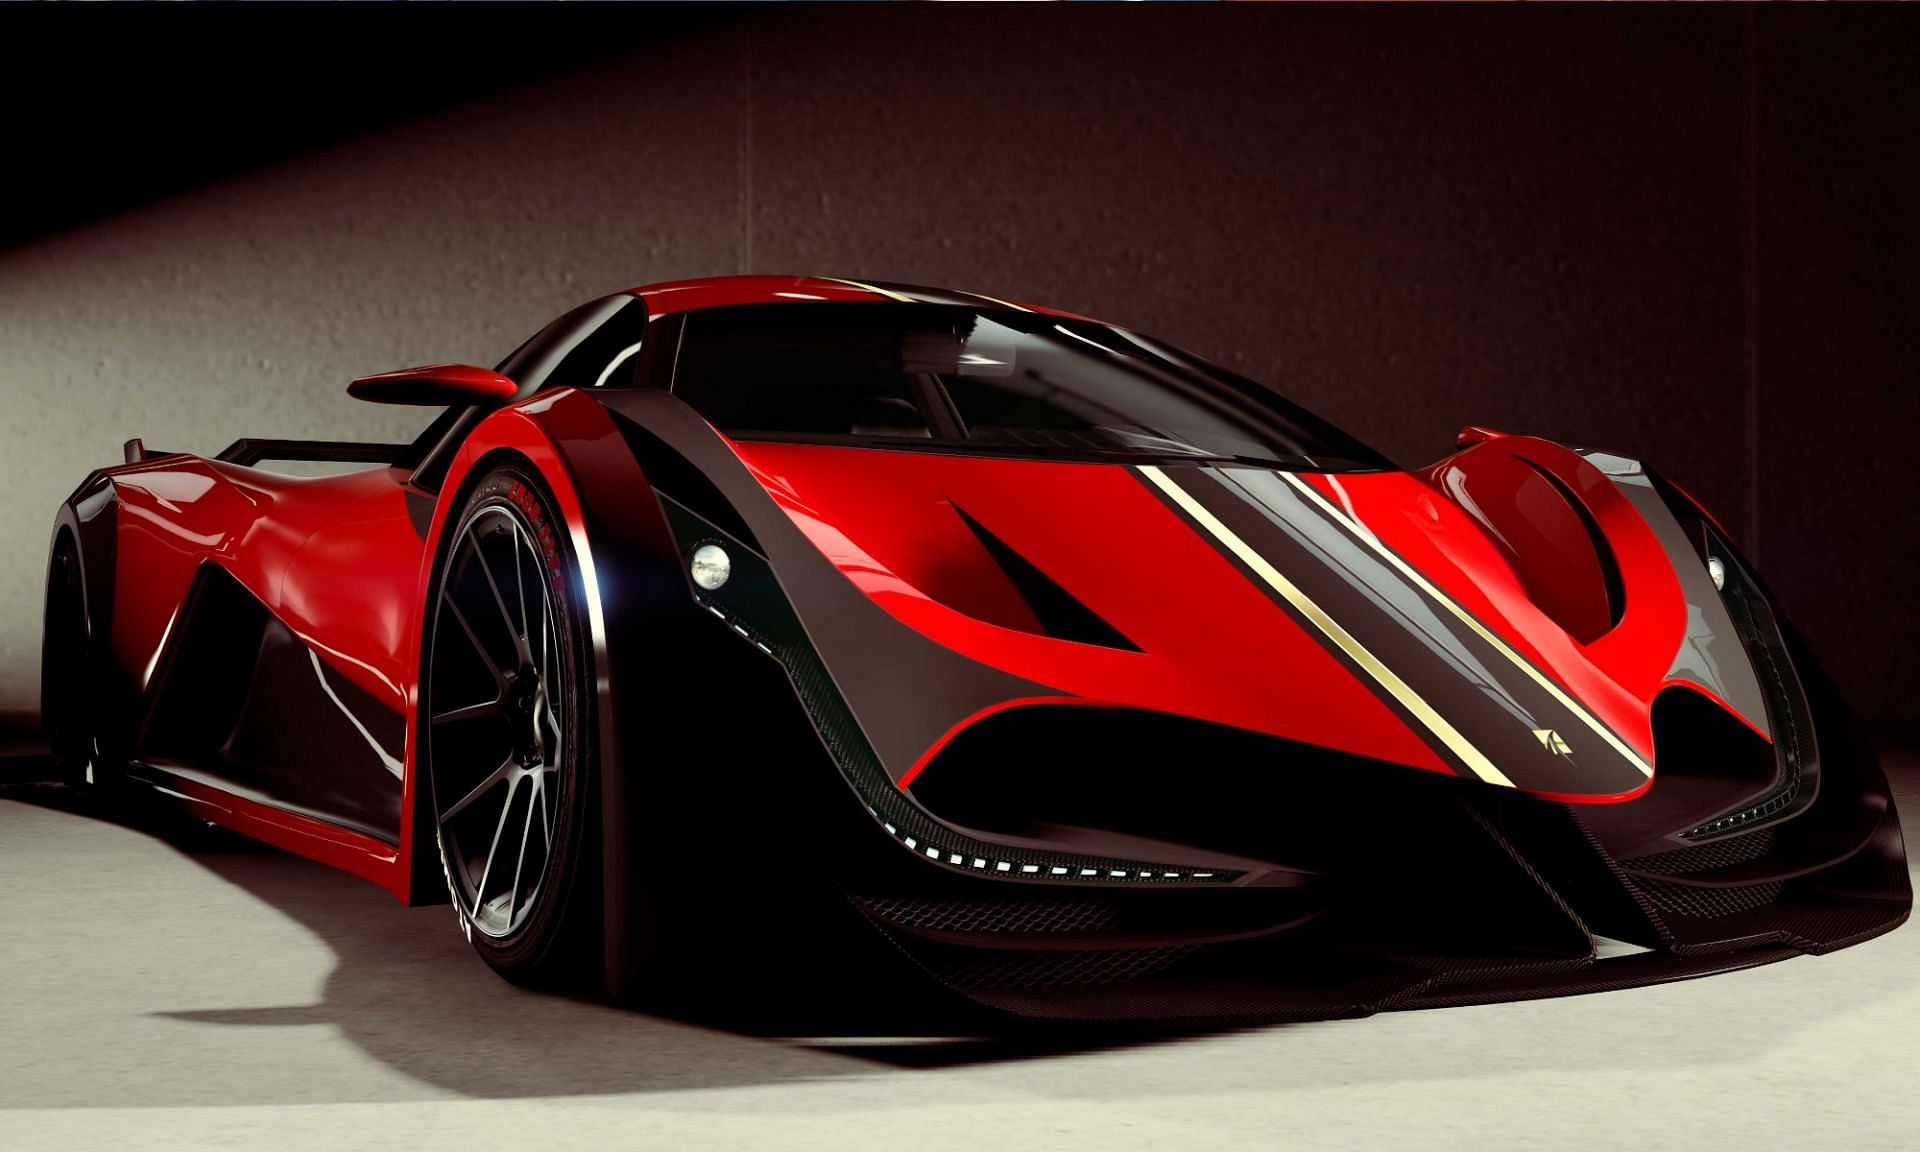 This super car is about to make its big return (Image via Rockstar Games)